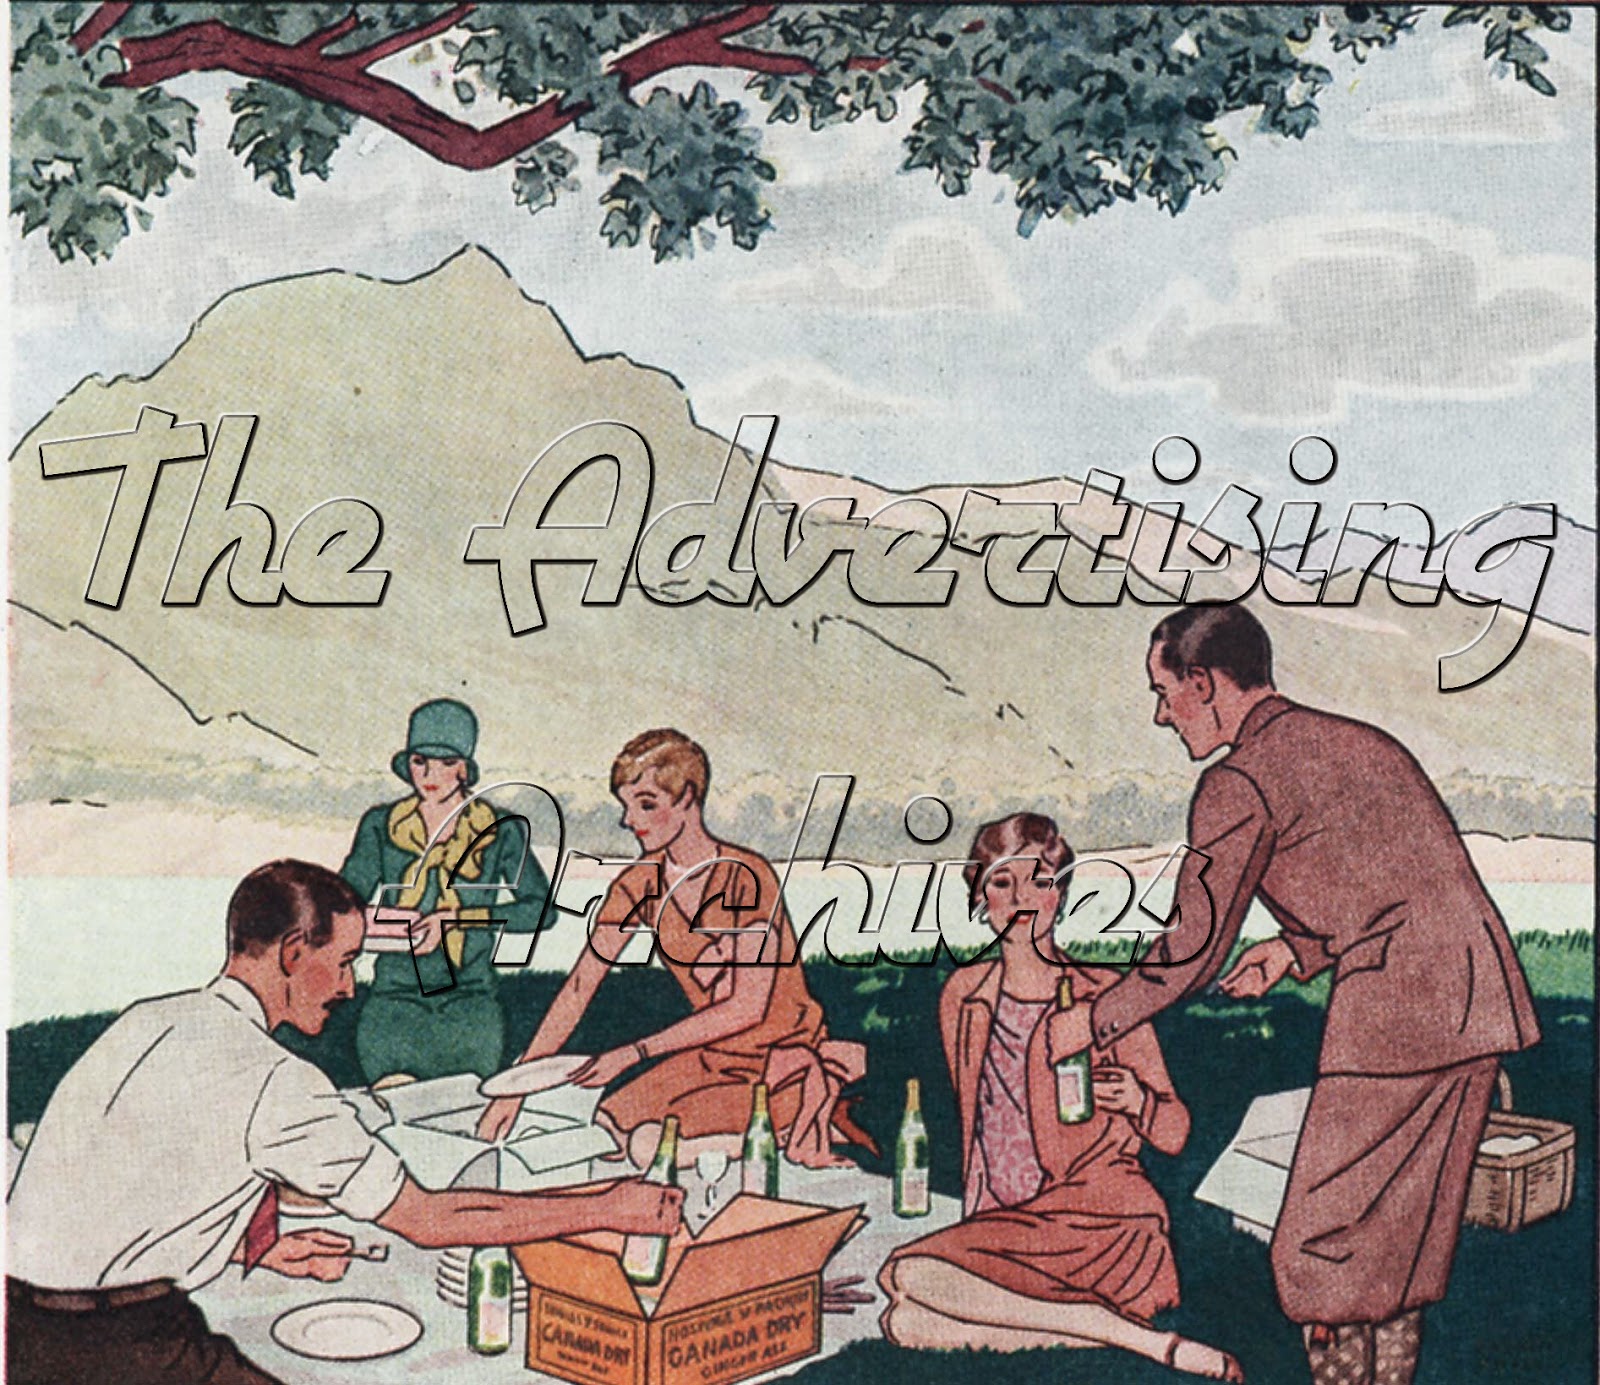 http://www.advertisingarchives.co.uk/index.php?service=search&action=do_quick_search&language=en&q=picnics